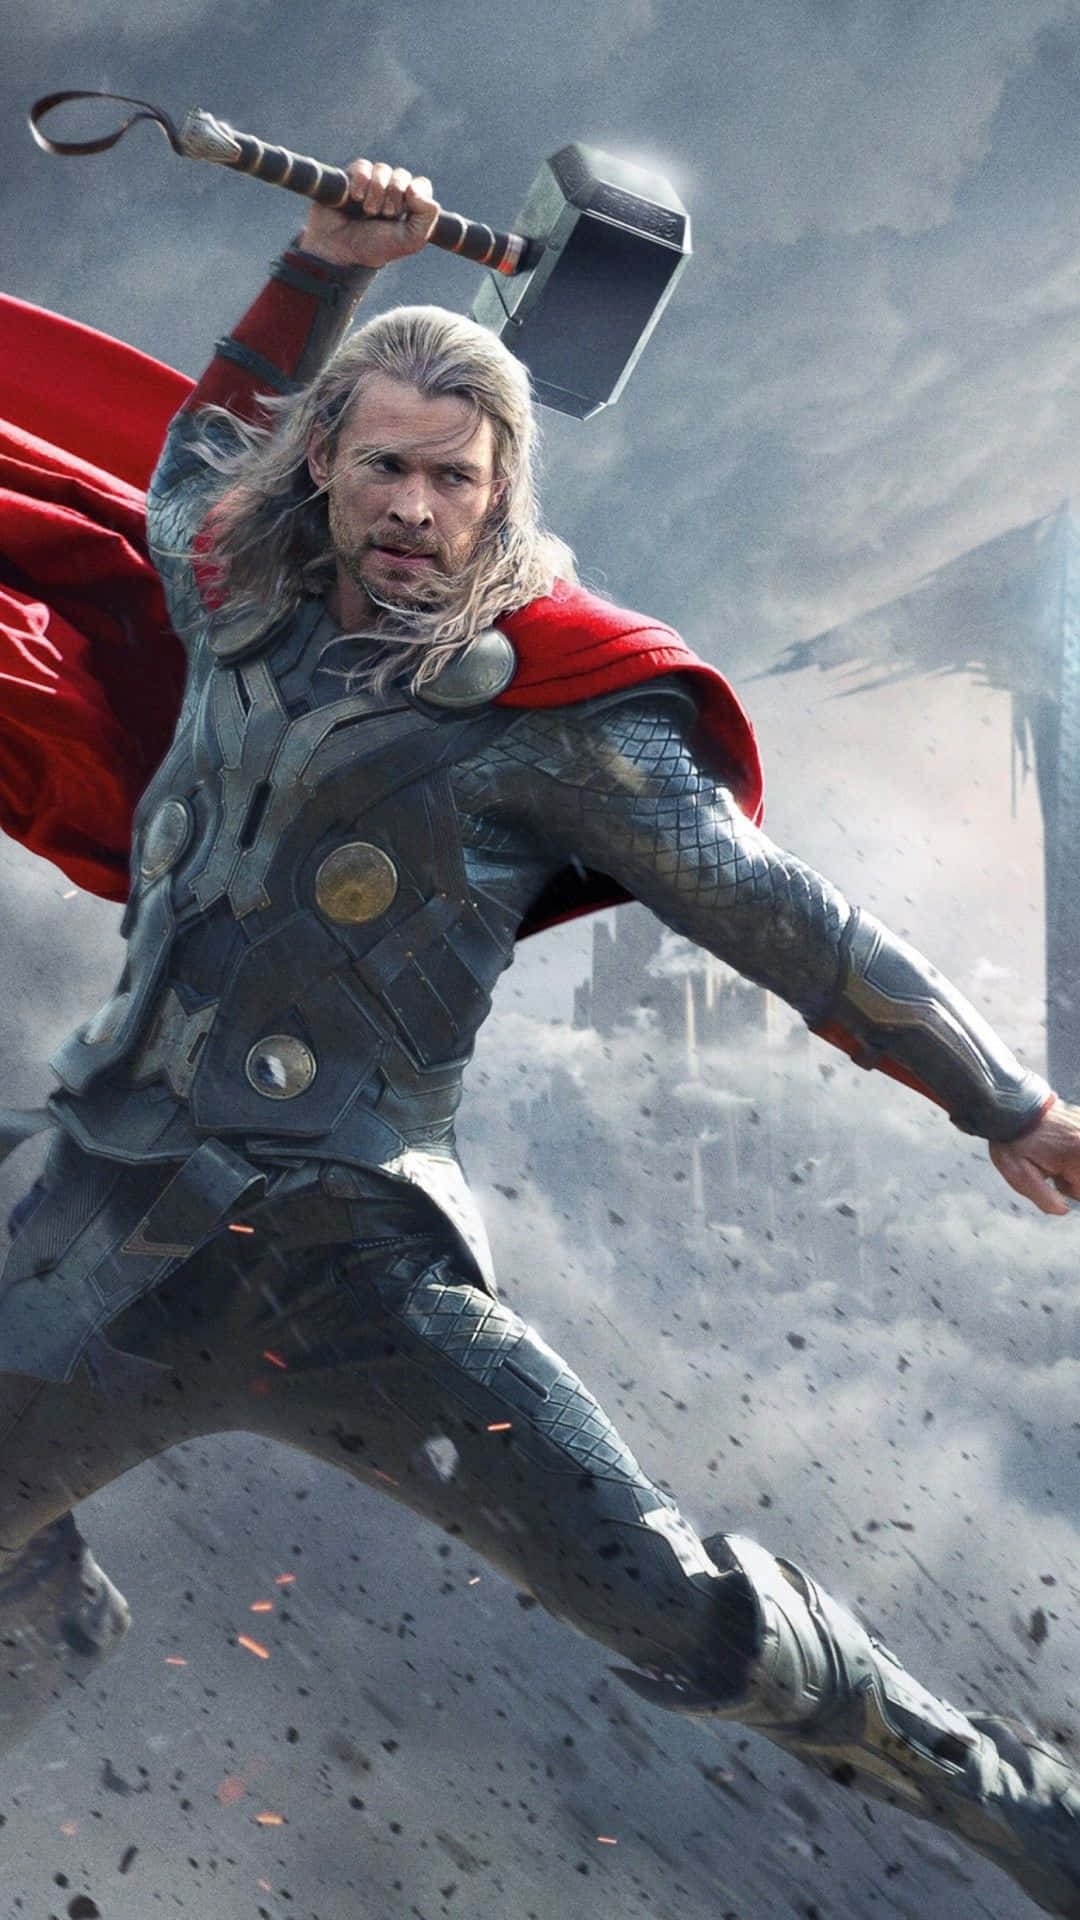 A mighty powerful Thor wielding a thunderous Hammer